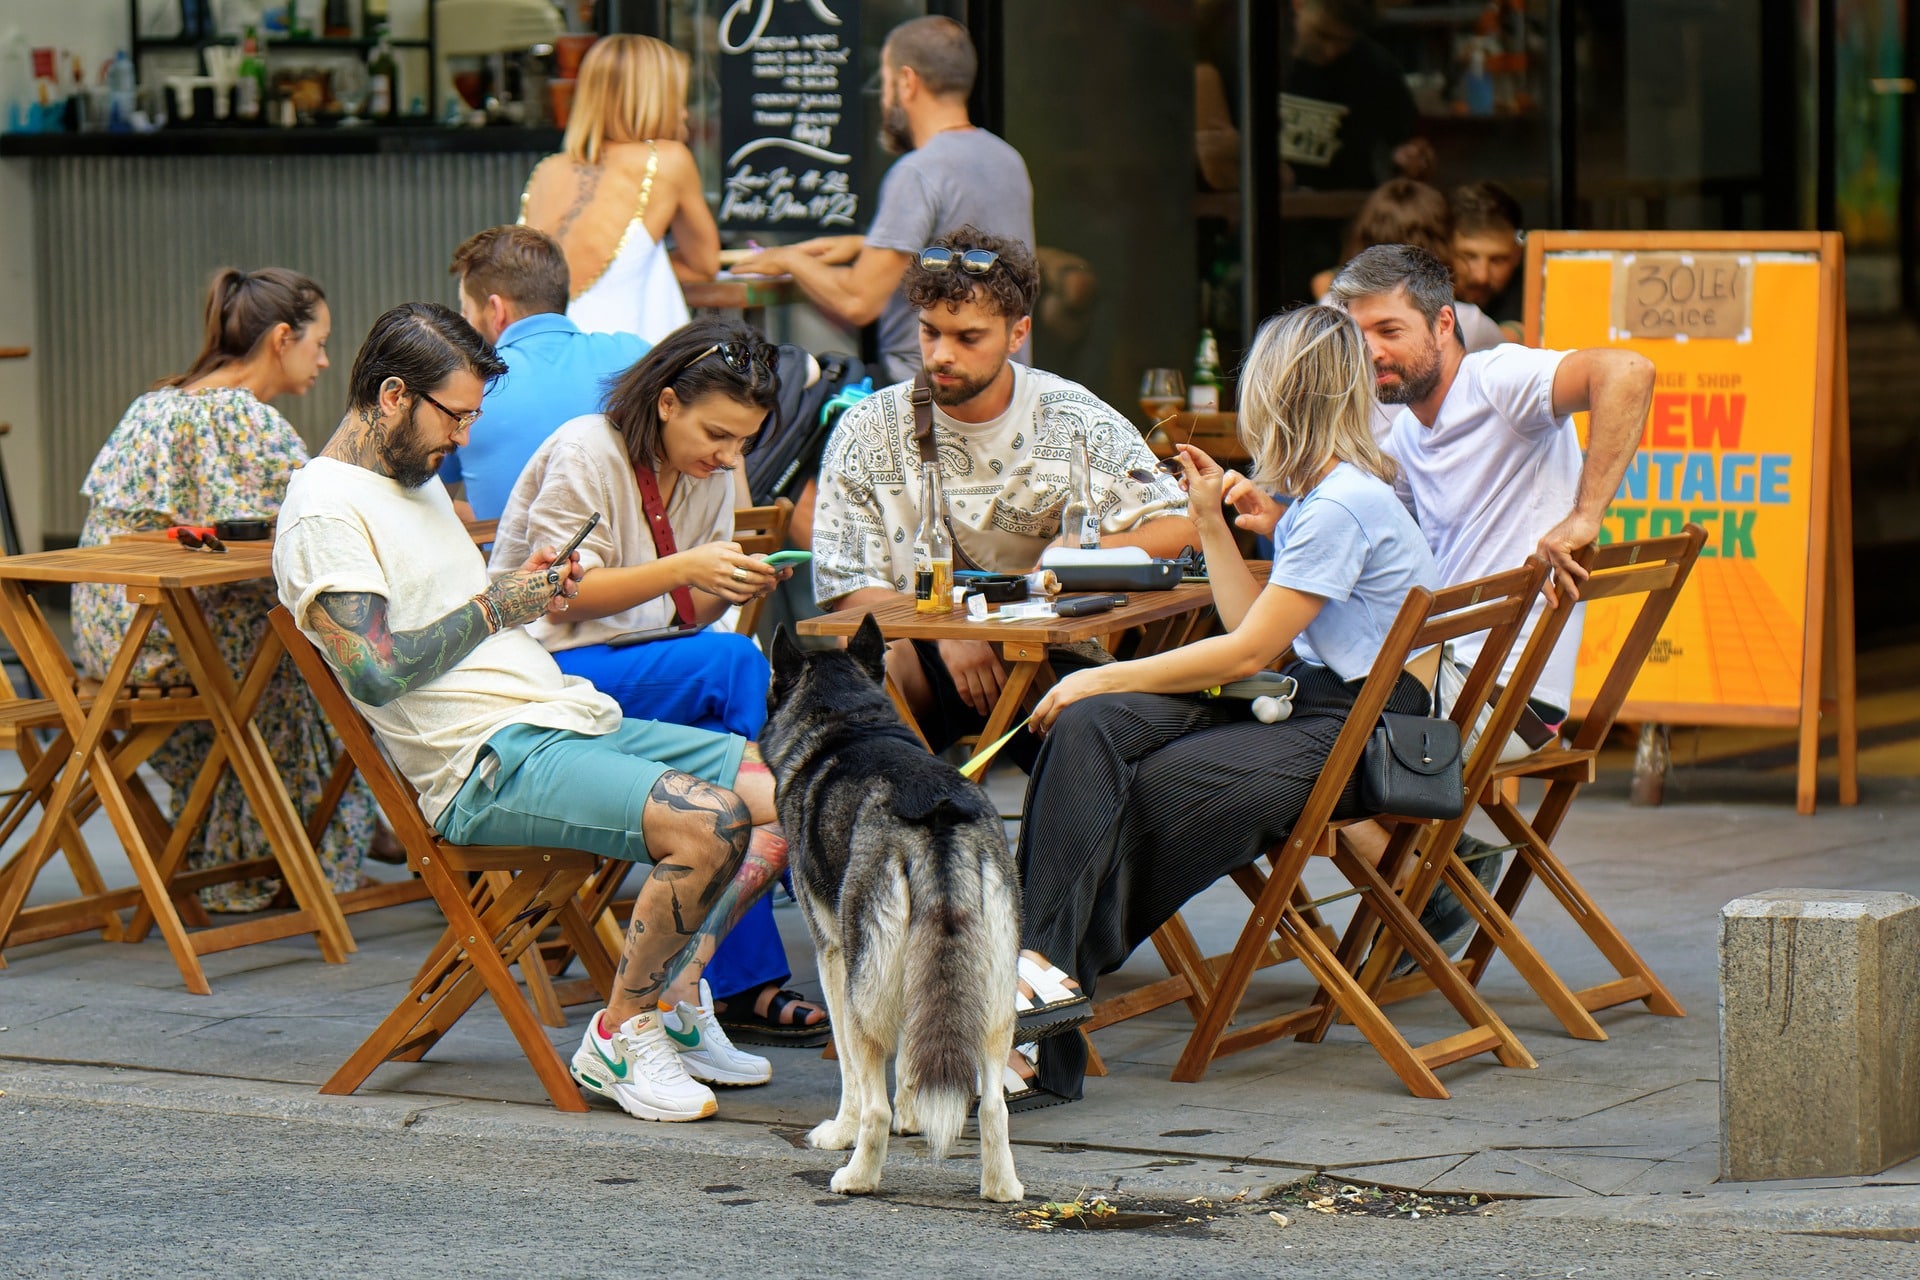 A group of people sit at a dog-friendly restaurant with their dog by the table.